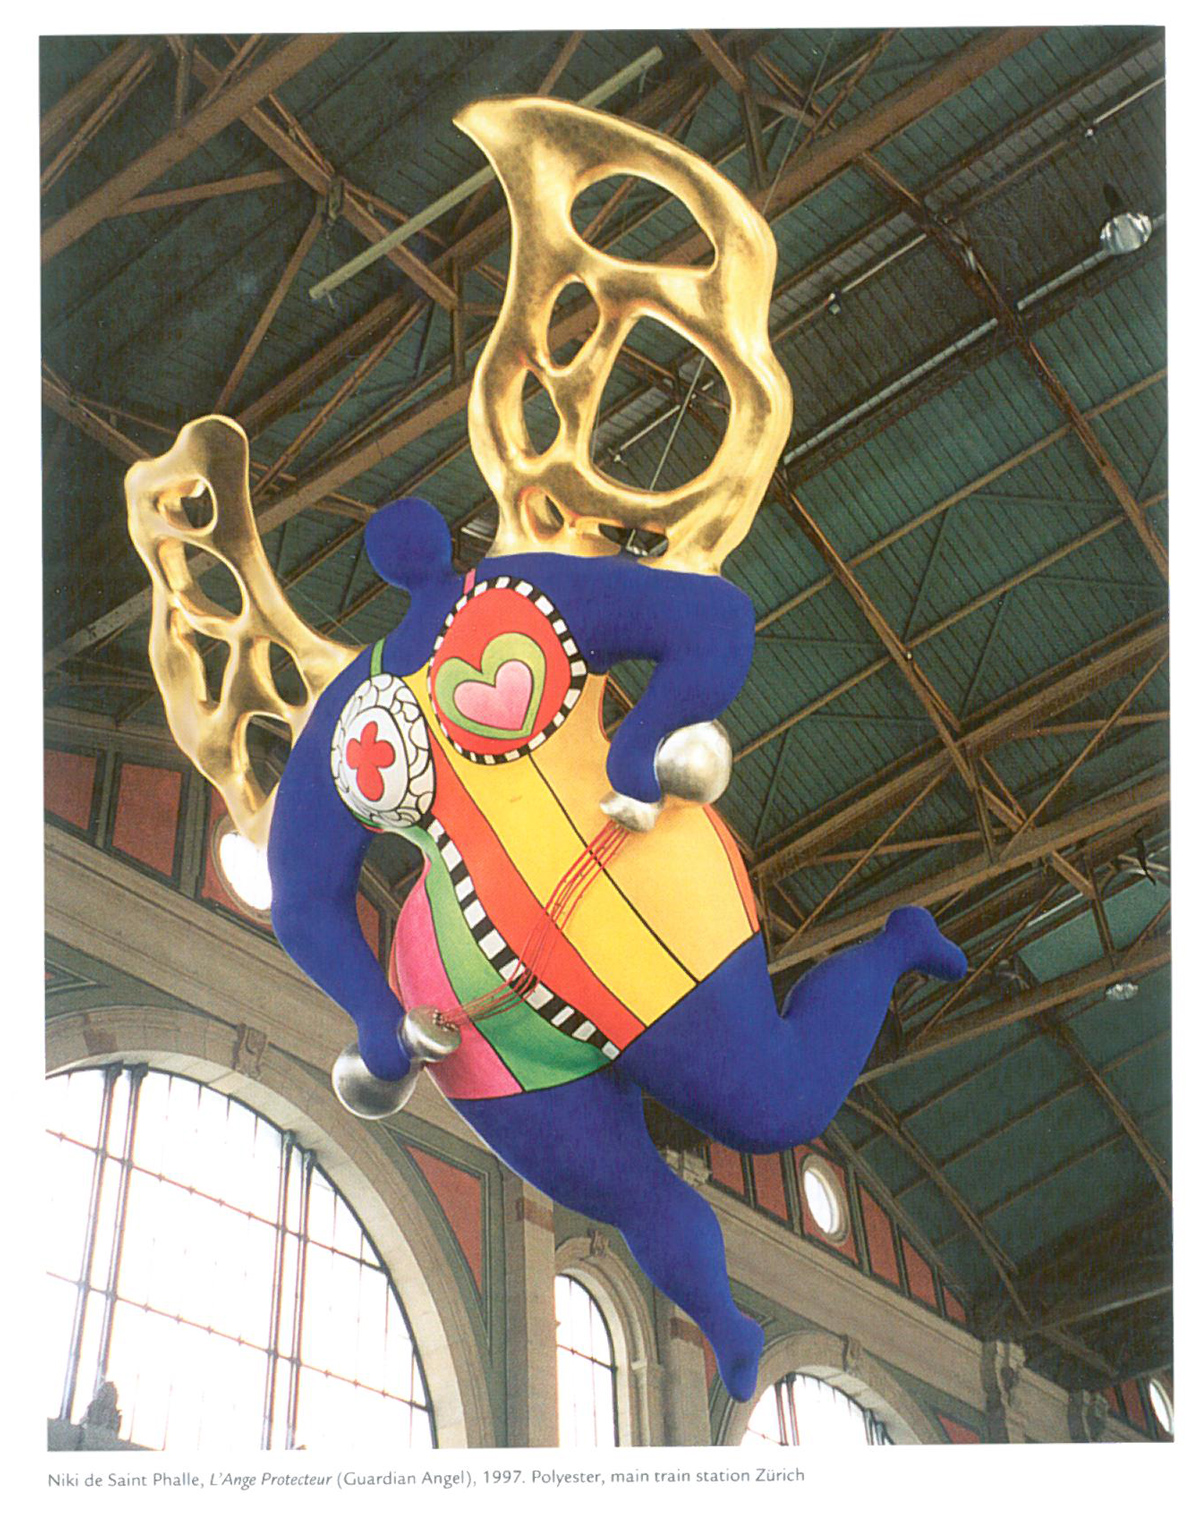 Niki de Saint Phalle’s L’ANGE PROTECTEUR. This enormous sculpture of painted polyester, which weighs 1.2 tons and is more than 36 feet high, hangs in the rafters of Zurich’s main railway station, and was made in 1997 by Niki to guard travelers. Image courtesy of Il Fondazione Giardino Dei Tarocchi. 